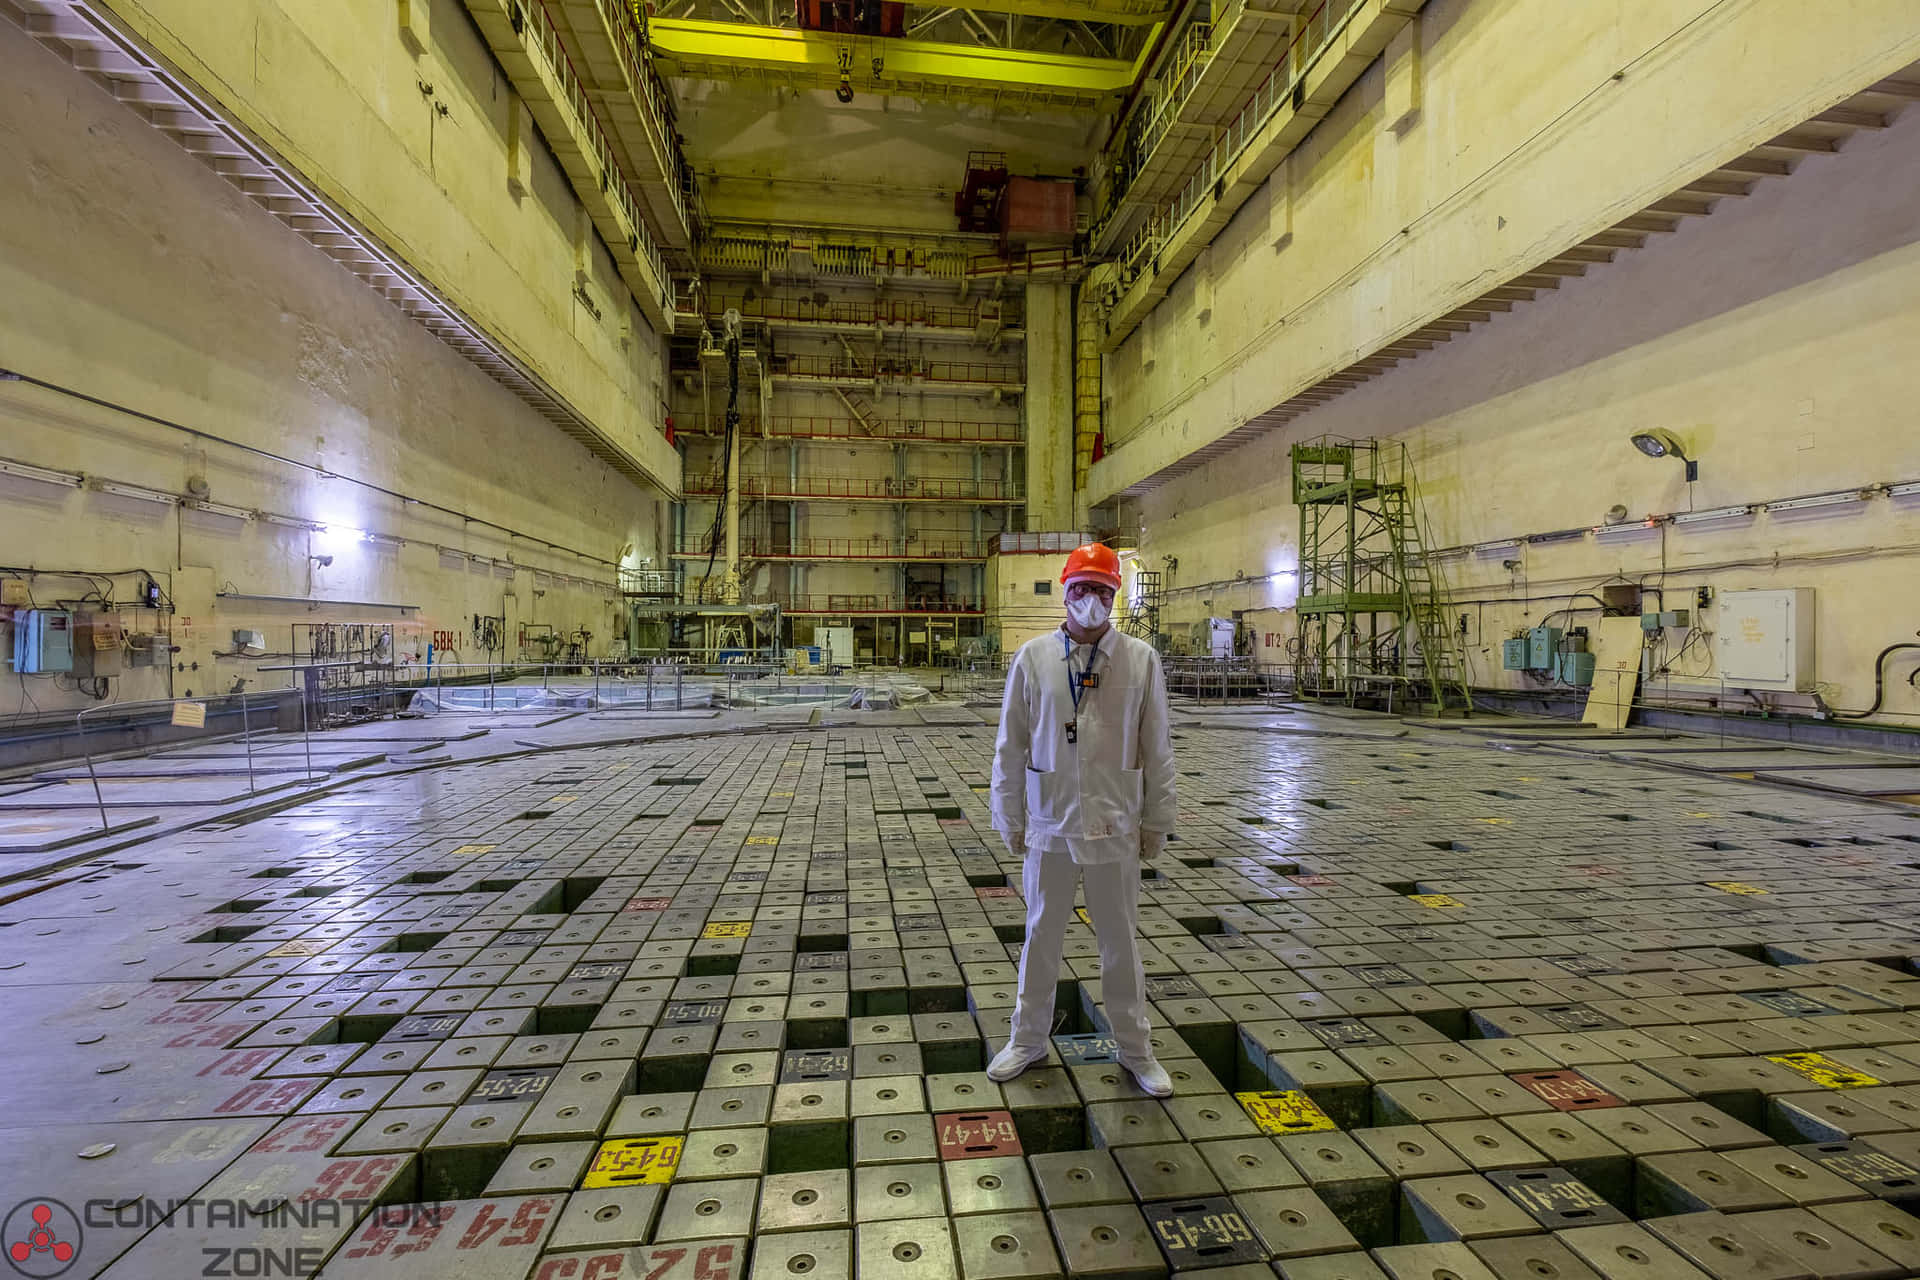 A Man In A Protective Suit Standing In A Large Room